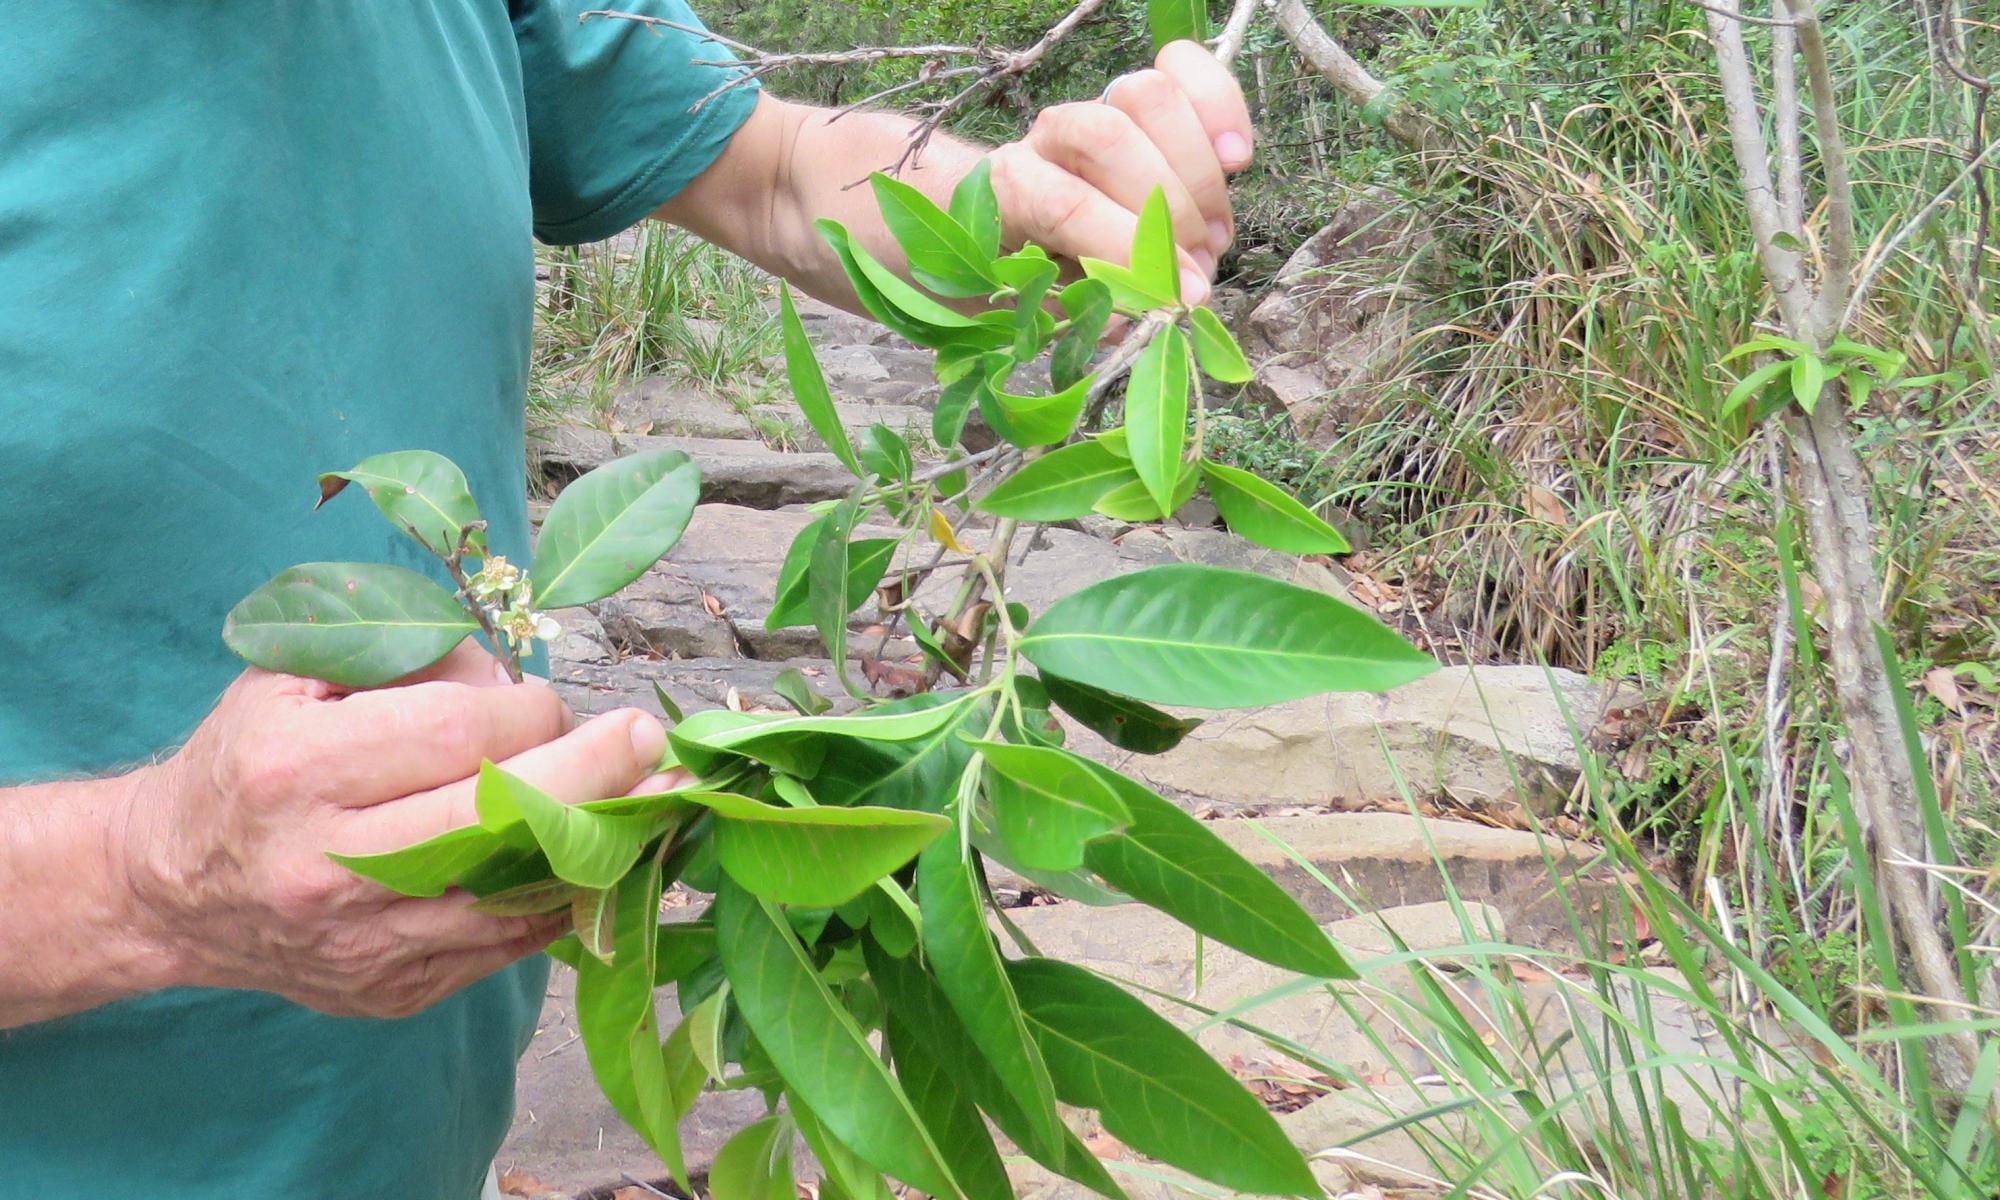 Australia's native guava plant close to being wiped out by invasive disease – study